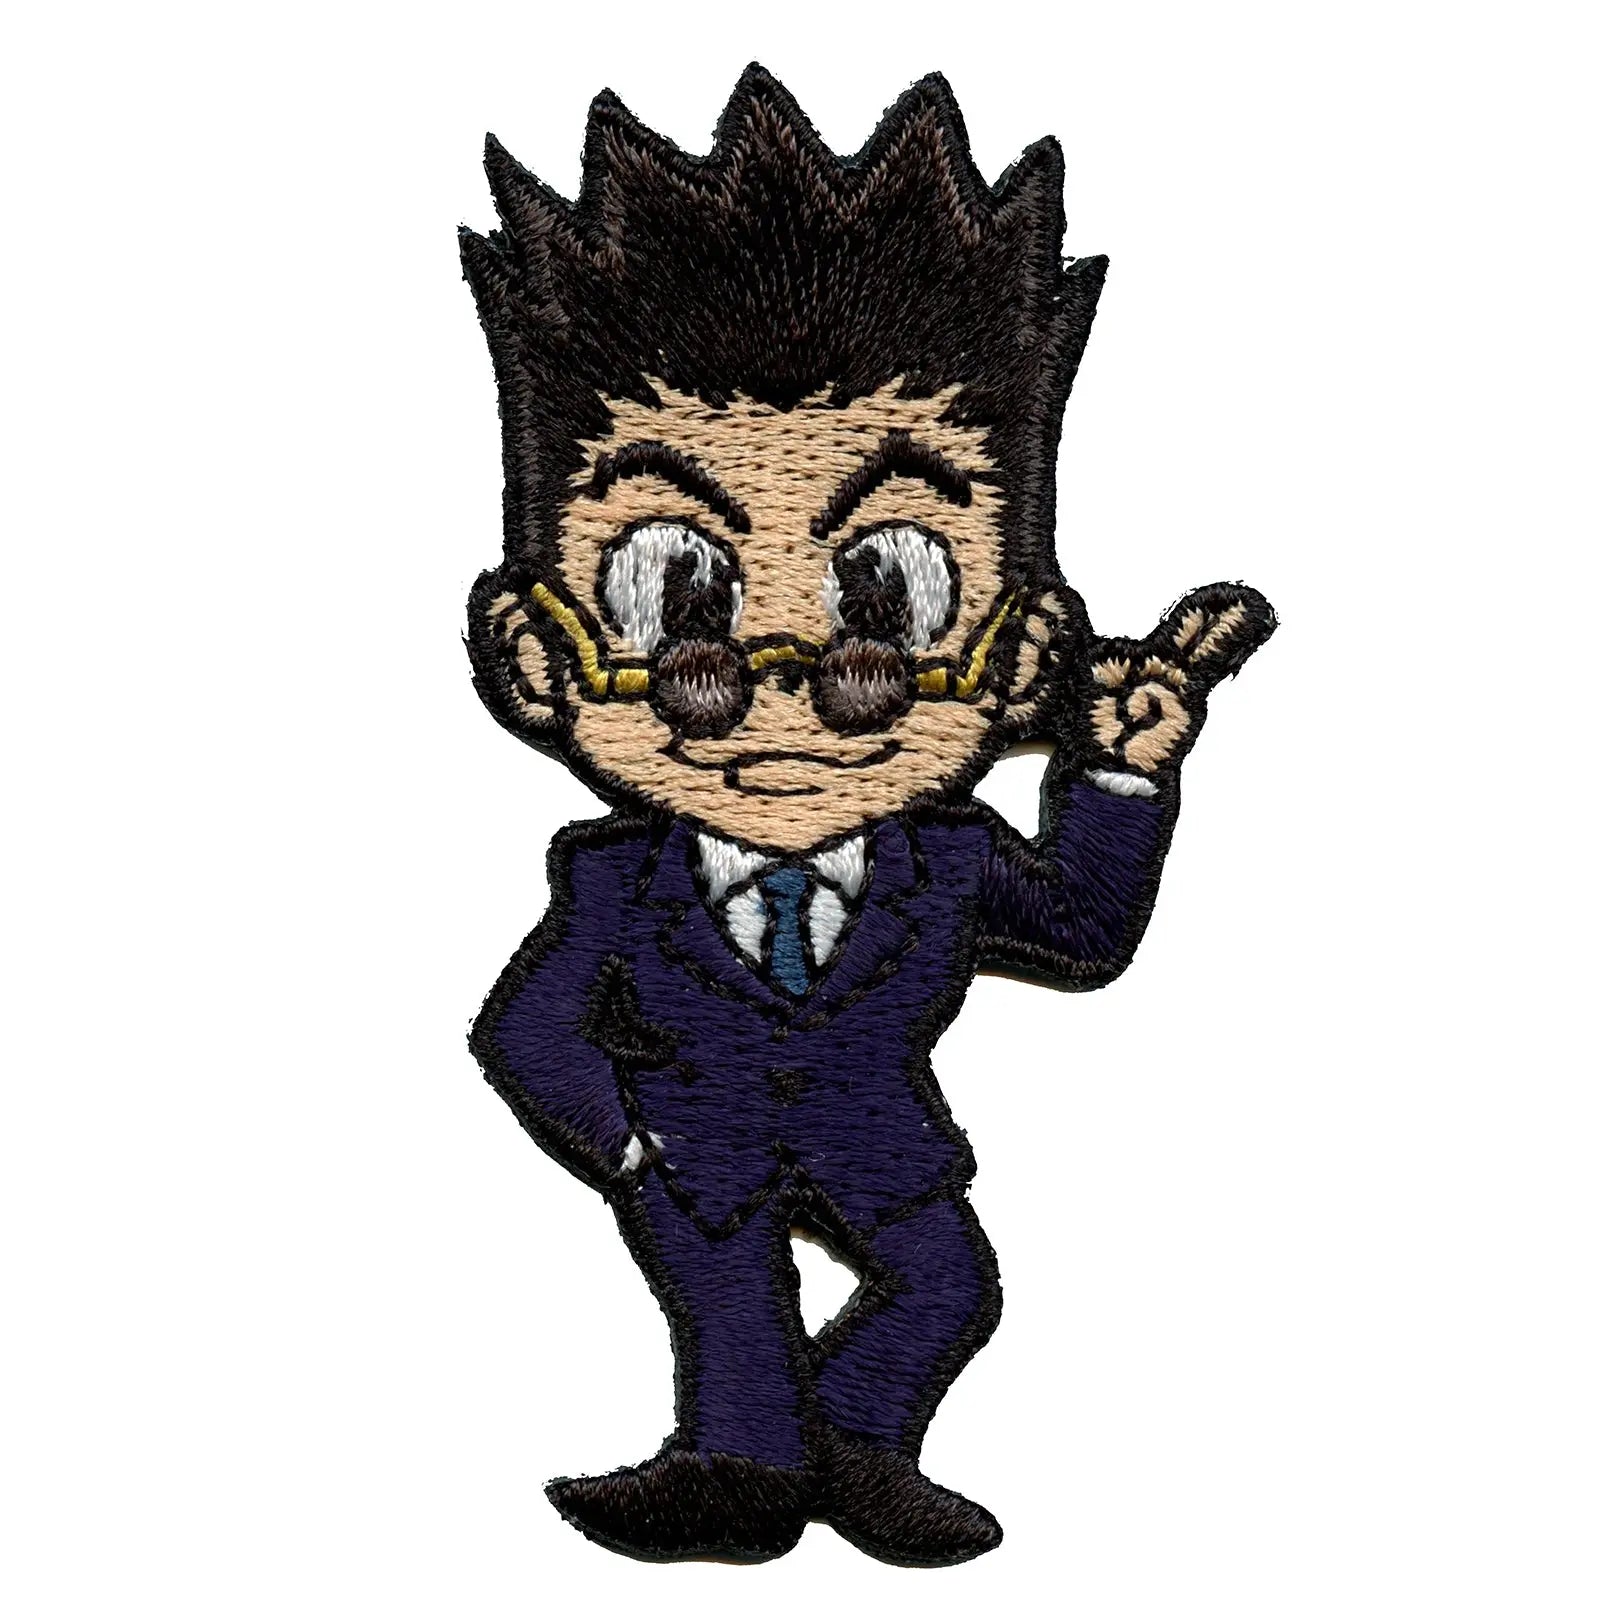 HunterXHunter Anime Leorio Full Body Embroidered Iron on Patch 